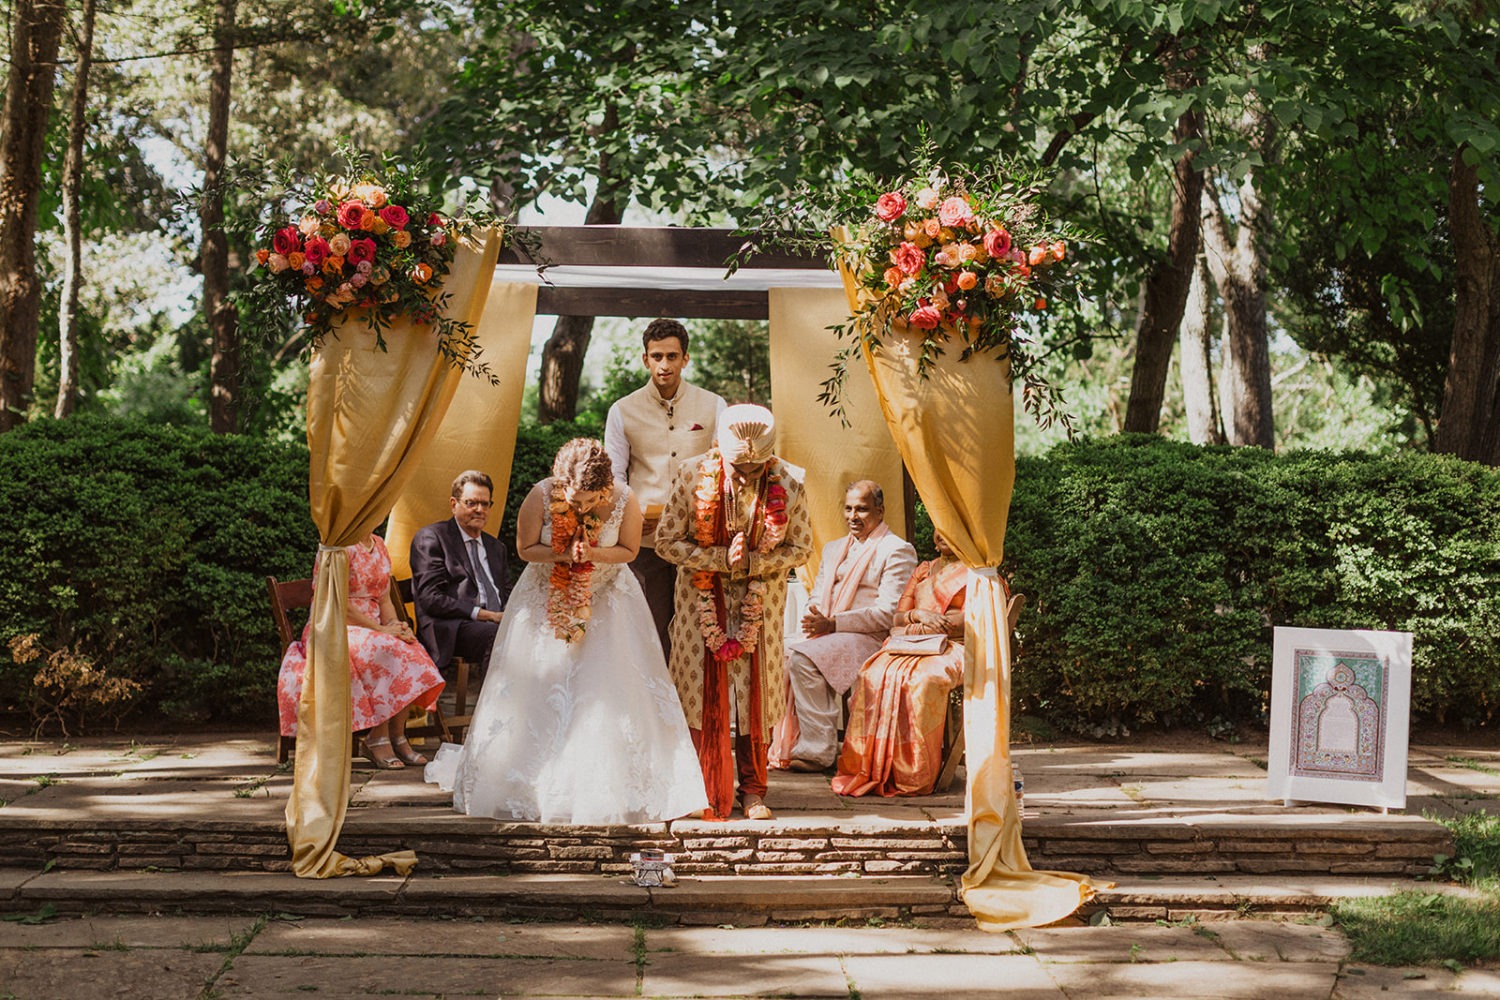 couple bows for a blessing during outdoor wedding ceremony